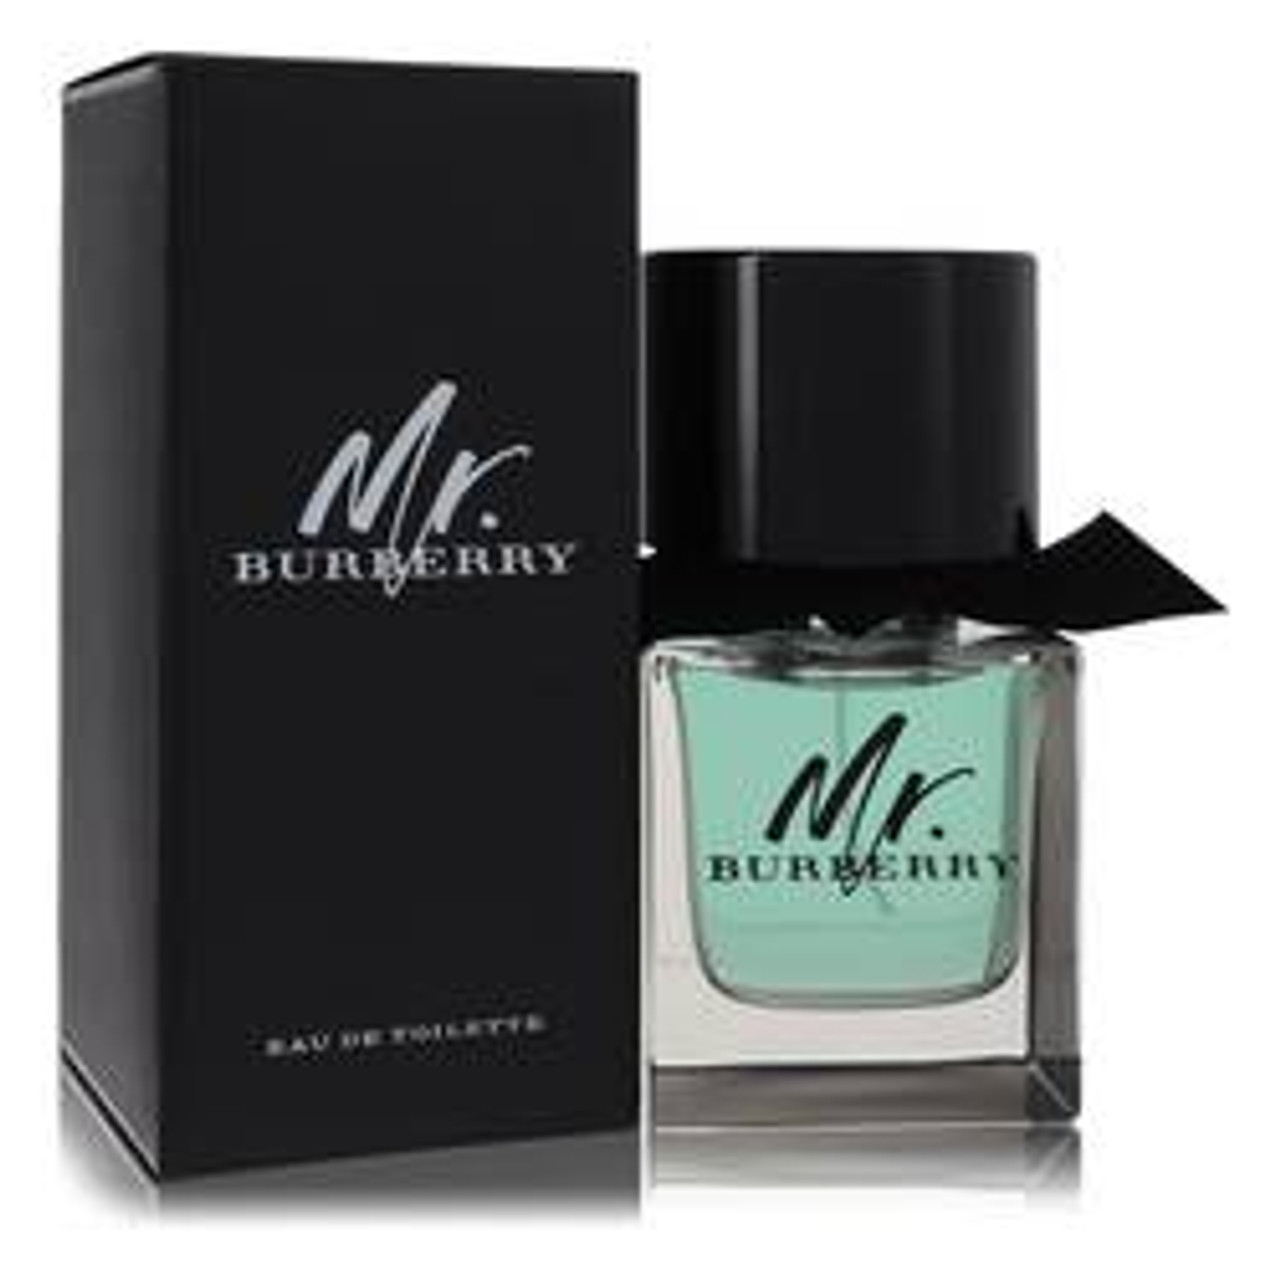 Mr Burberry Cologne By Burberry Eau De Toilette Spray 1.6 oz for Men - [From 144.00 - Choose pk Qty ] - *Ships from Miami